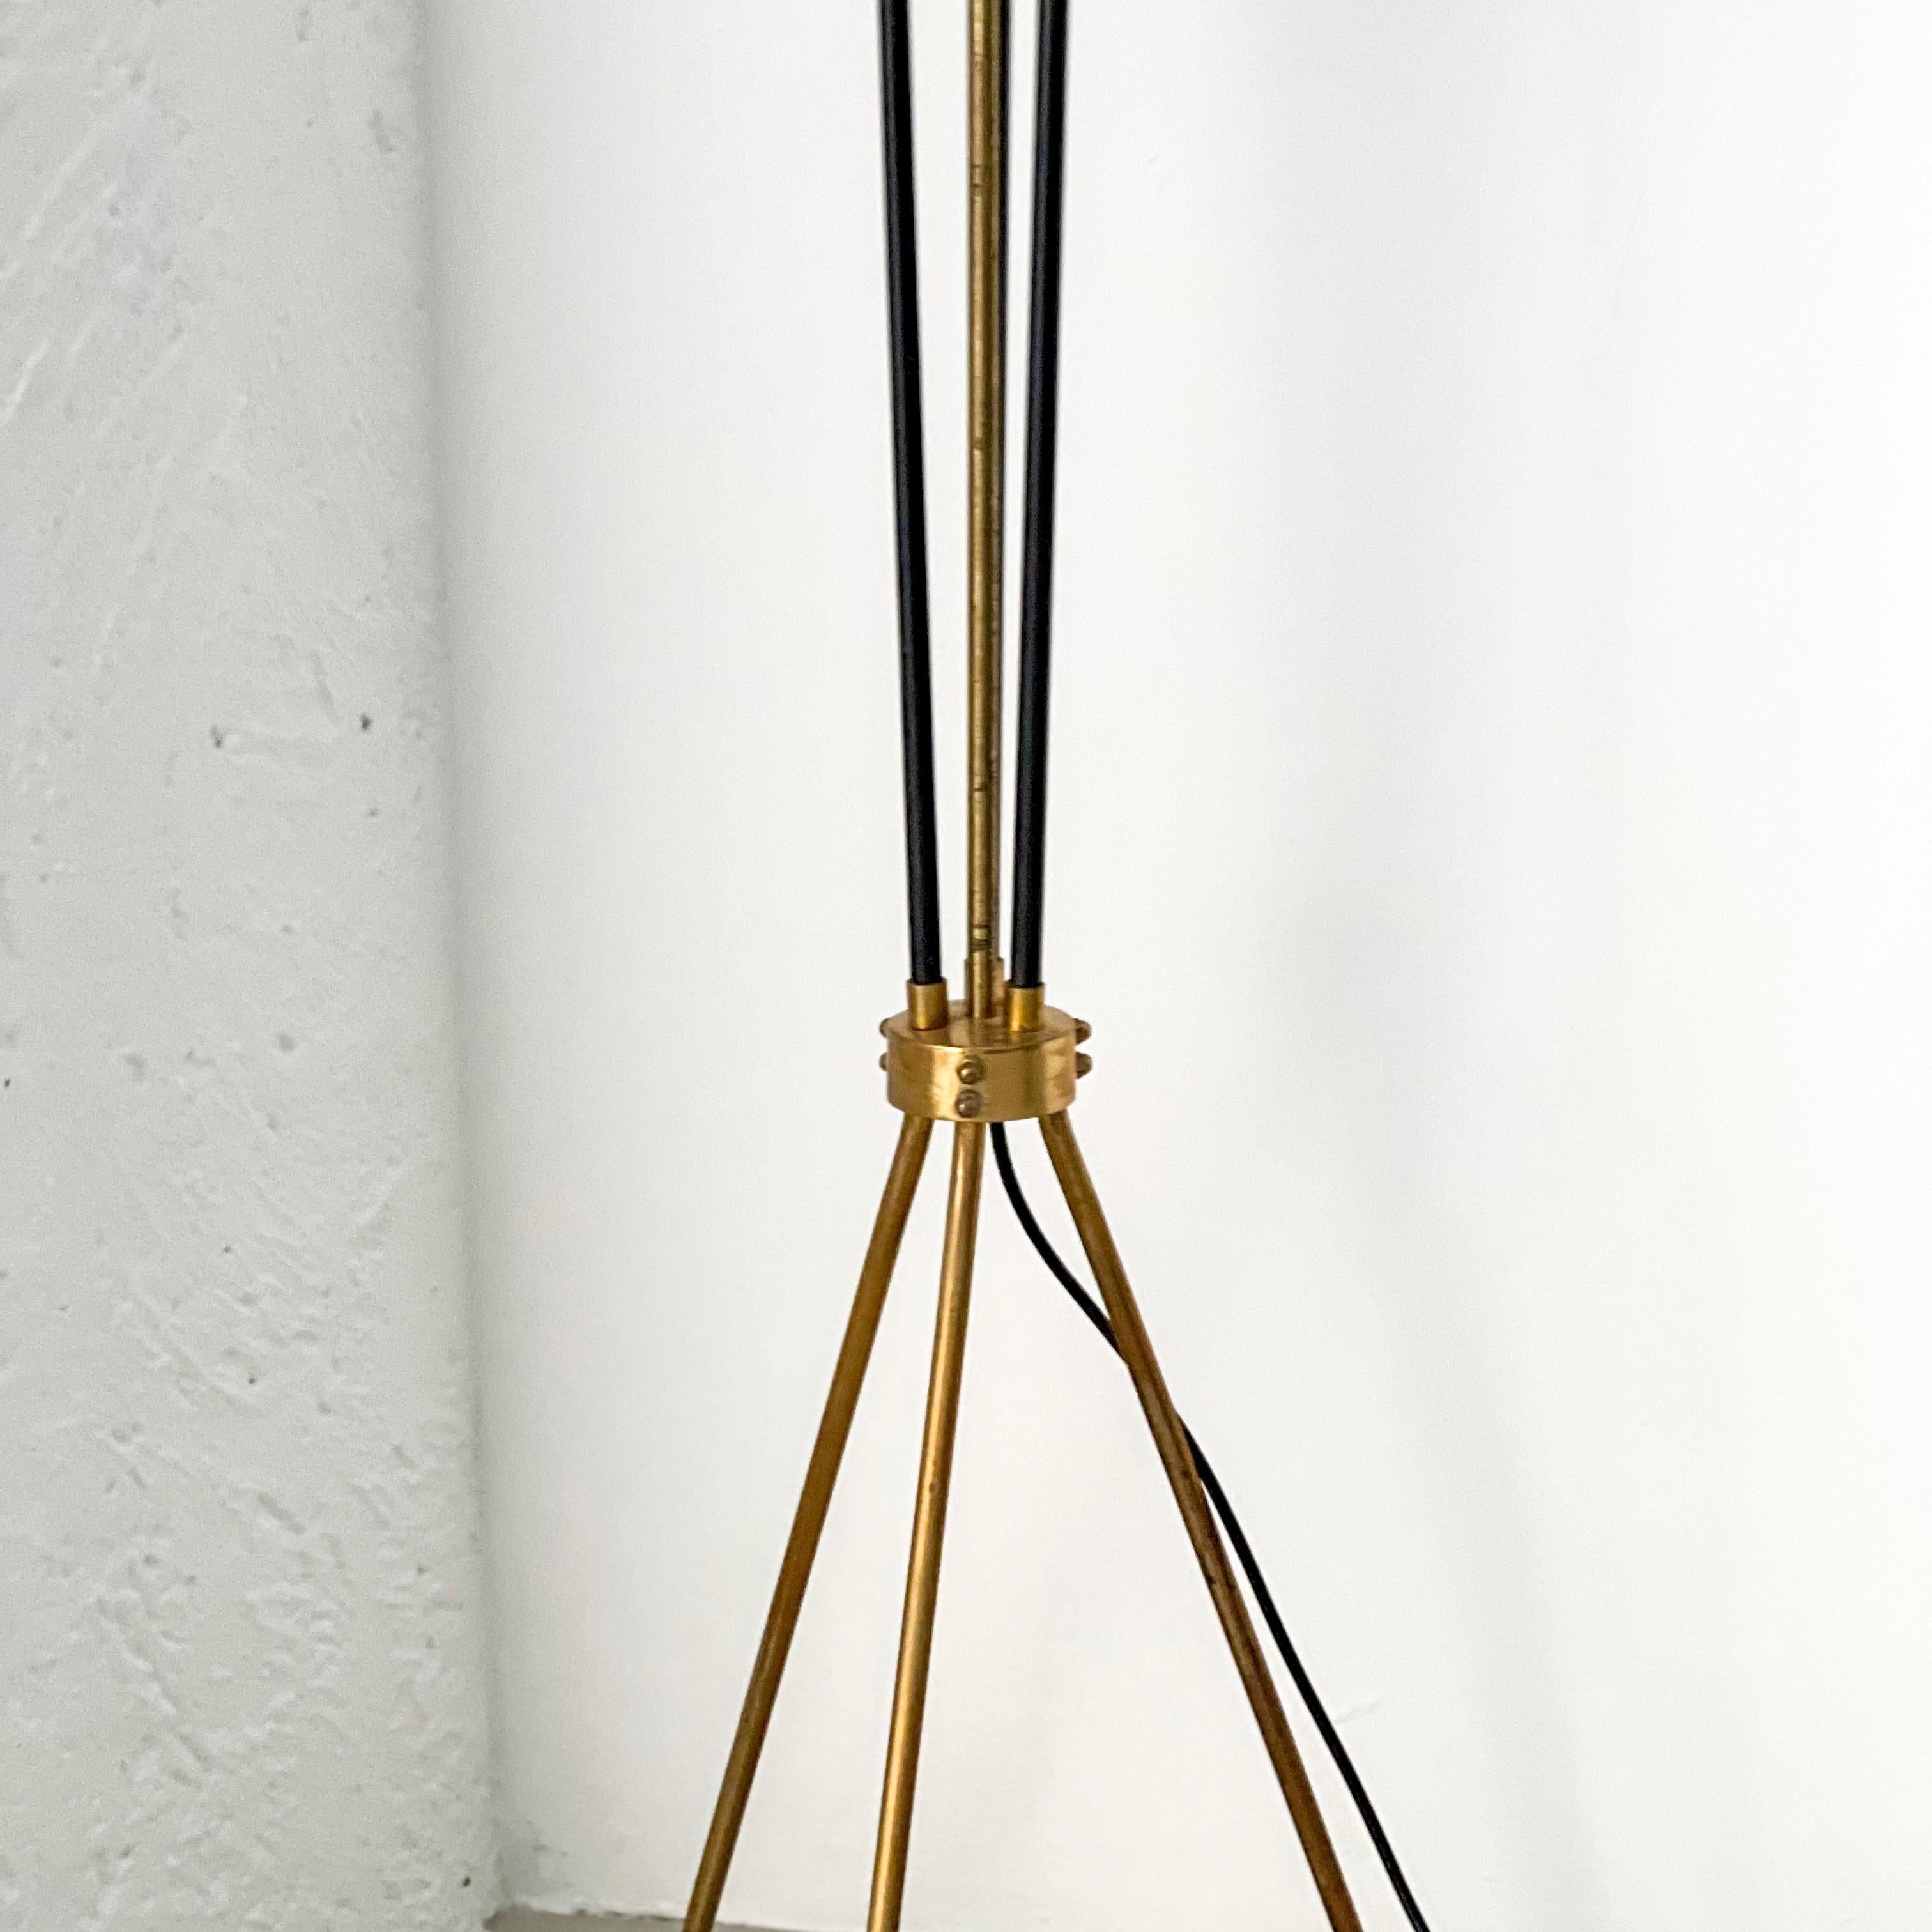 Vintage Italian Brass Floor Lamp in the style of Stilnovo, three legs, opaline In Good Condition For Sale In Milano, IT